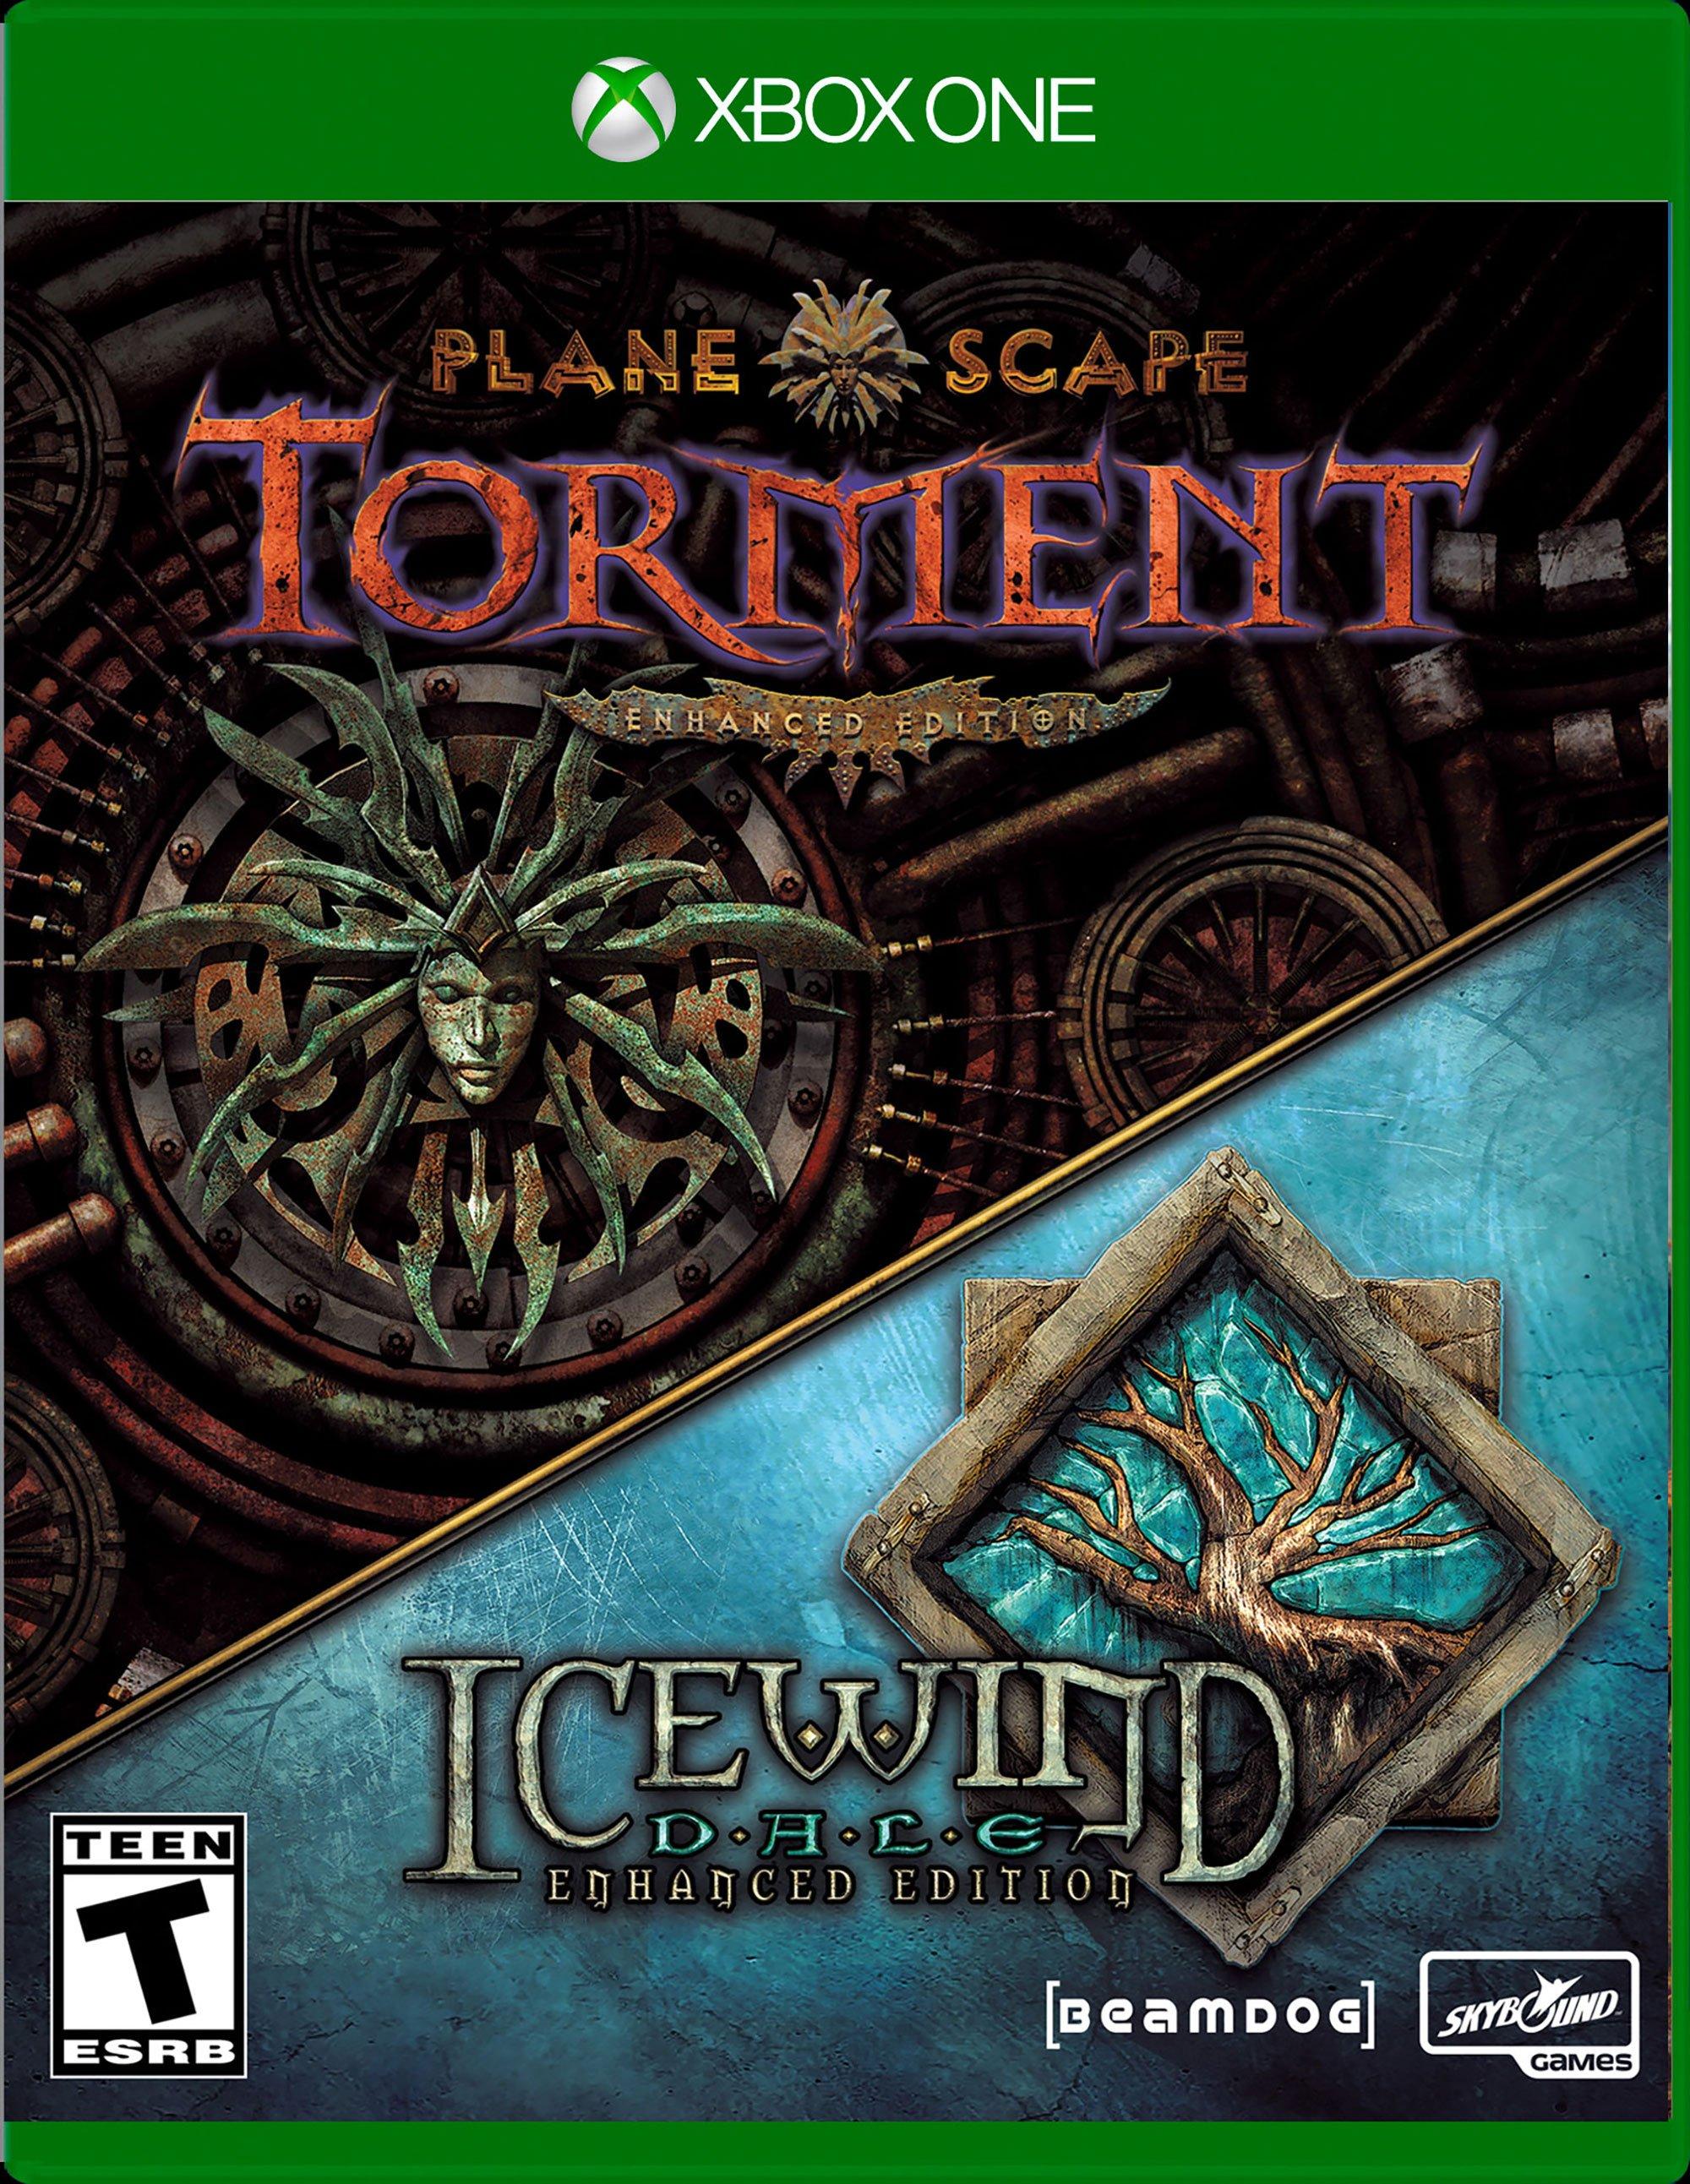 Planescape Torment and Icewind Enhanced One | Xbox Edition GameStop | - Xbox One